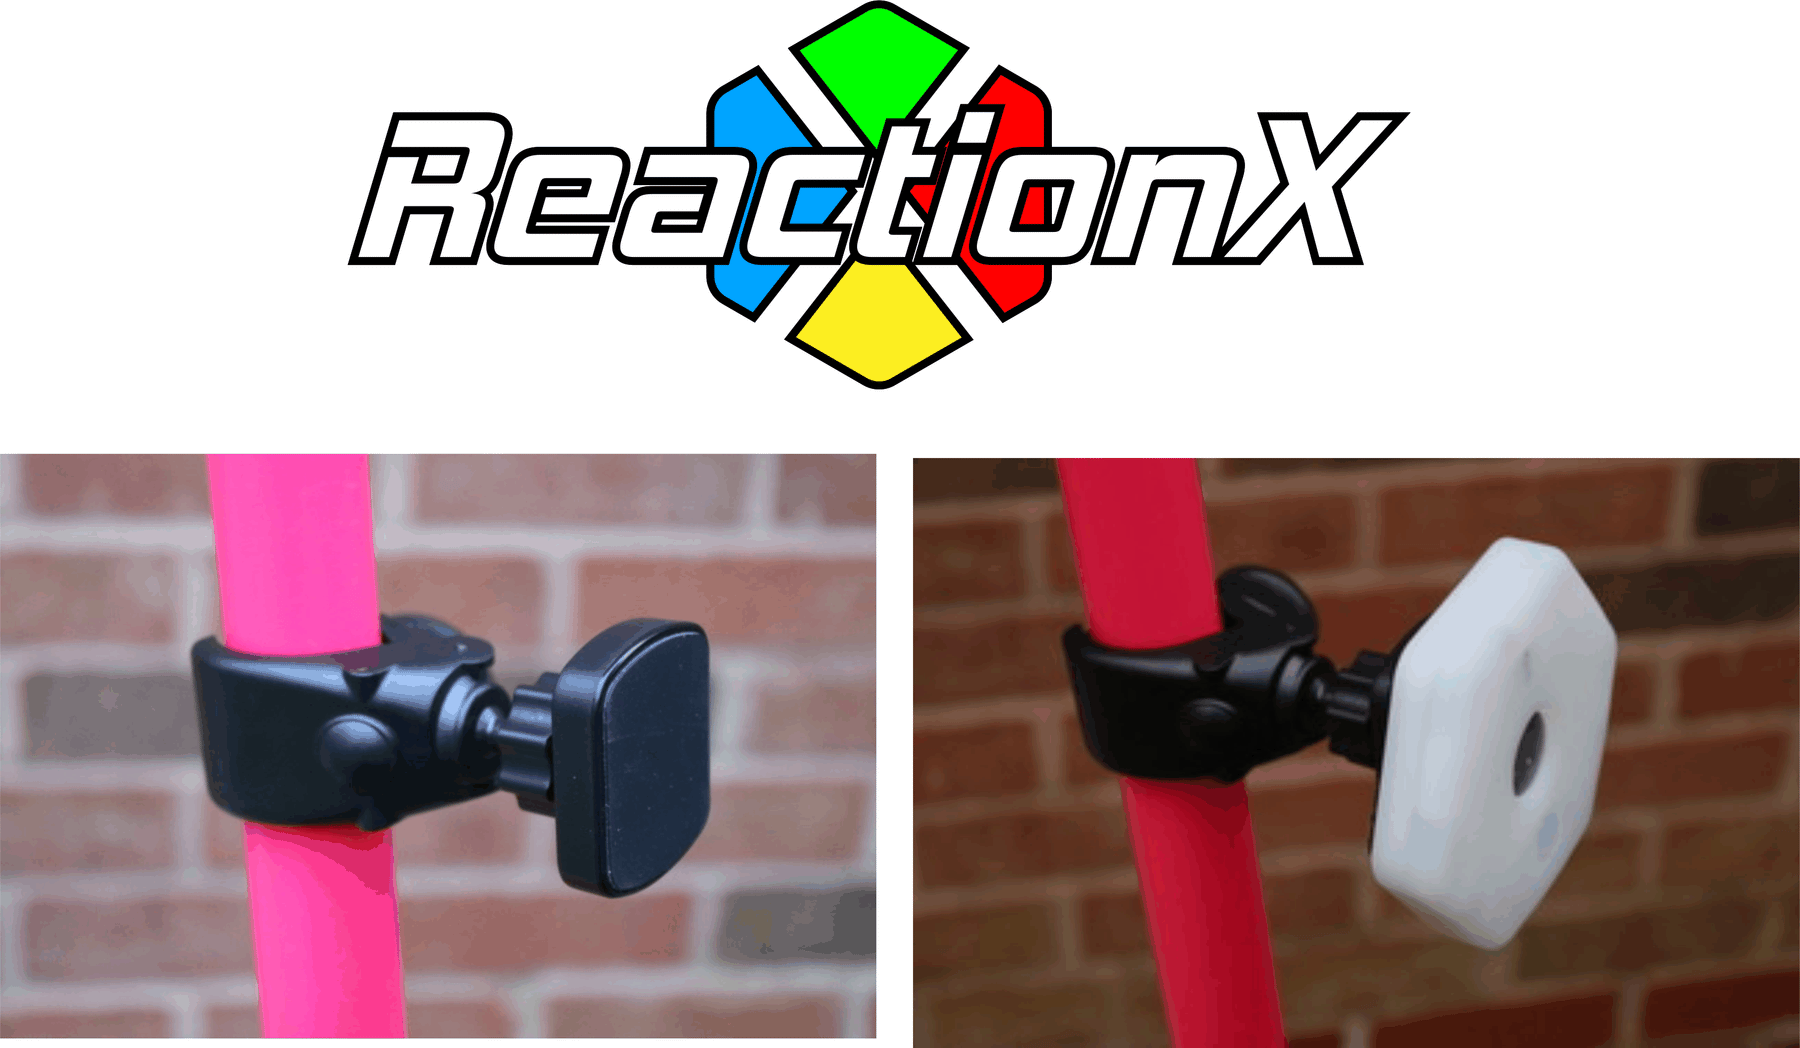 Reaction X - 4 Pole clamps with magnets.